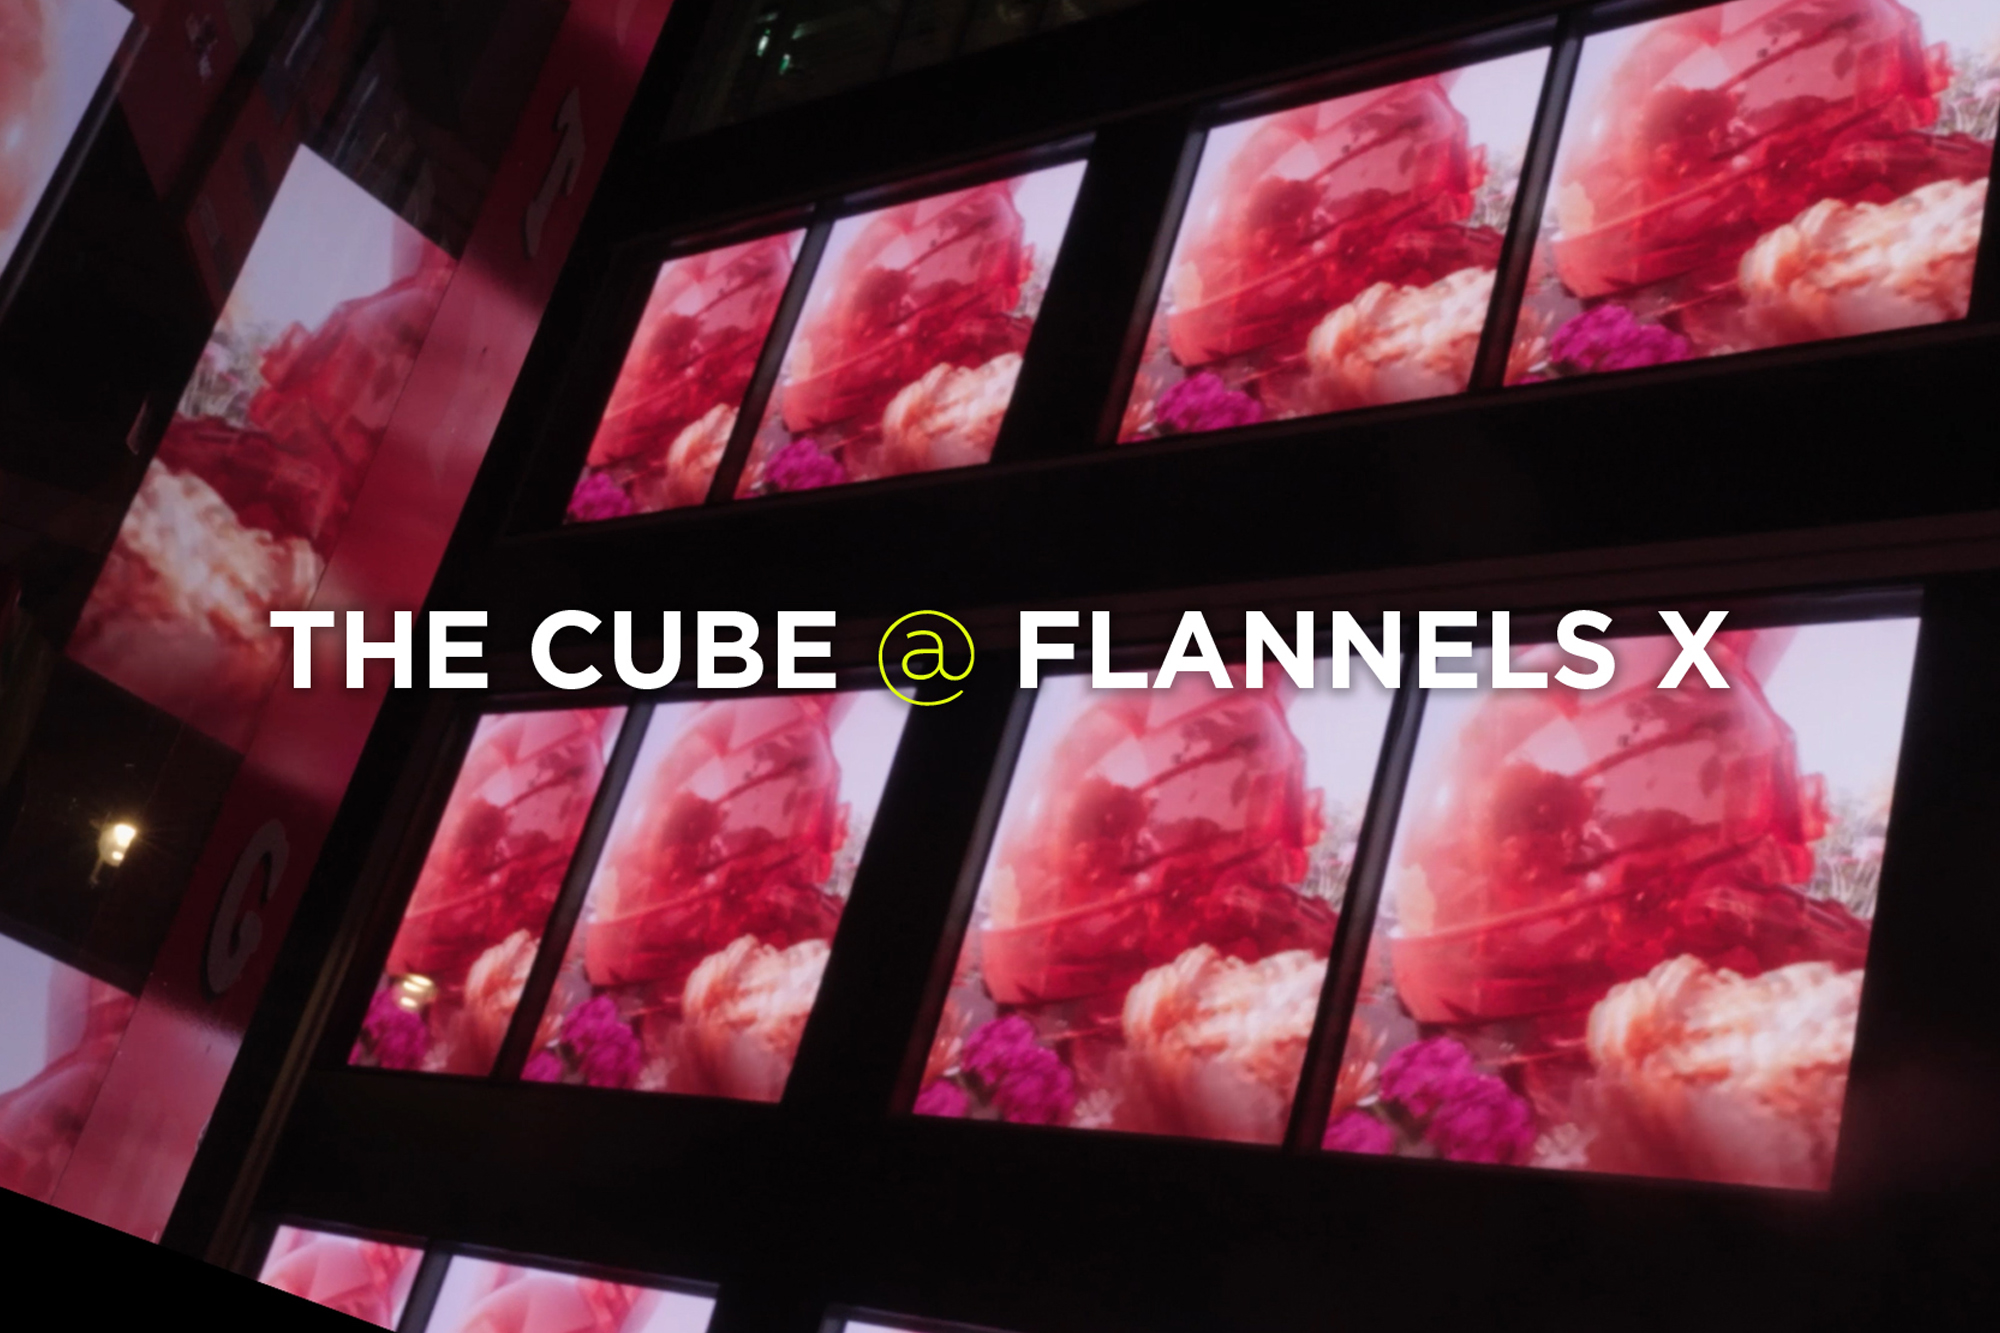 THE CUBE @ FLANNELS X